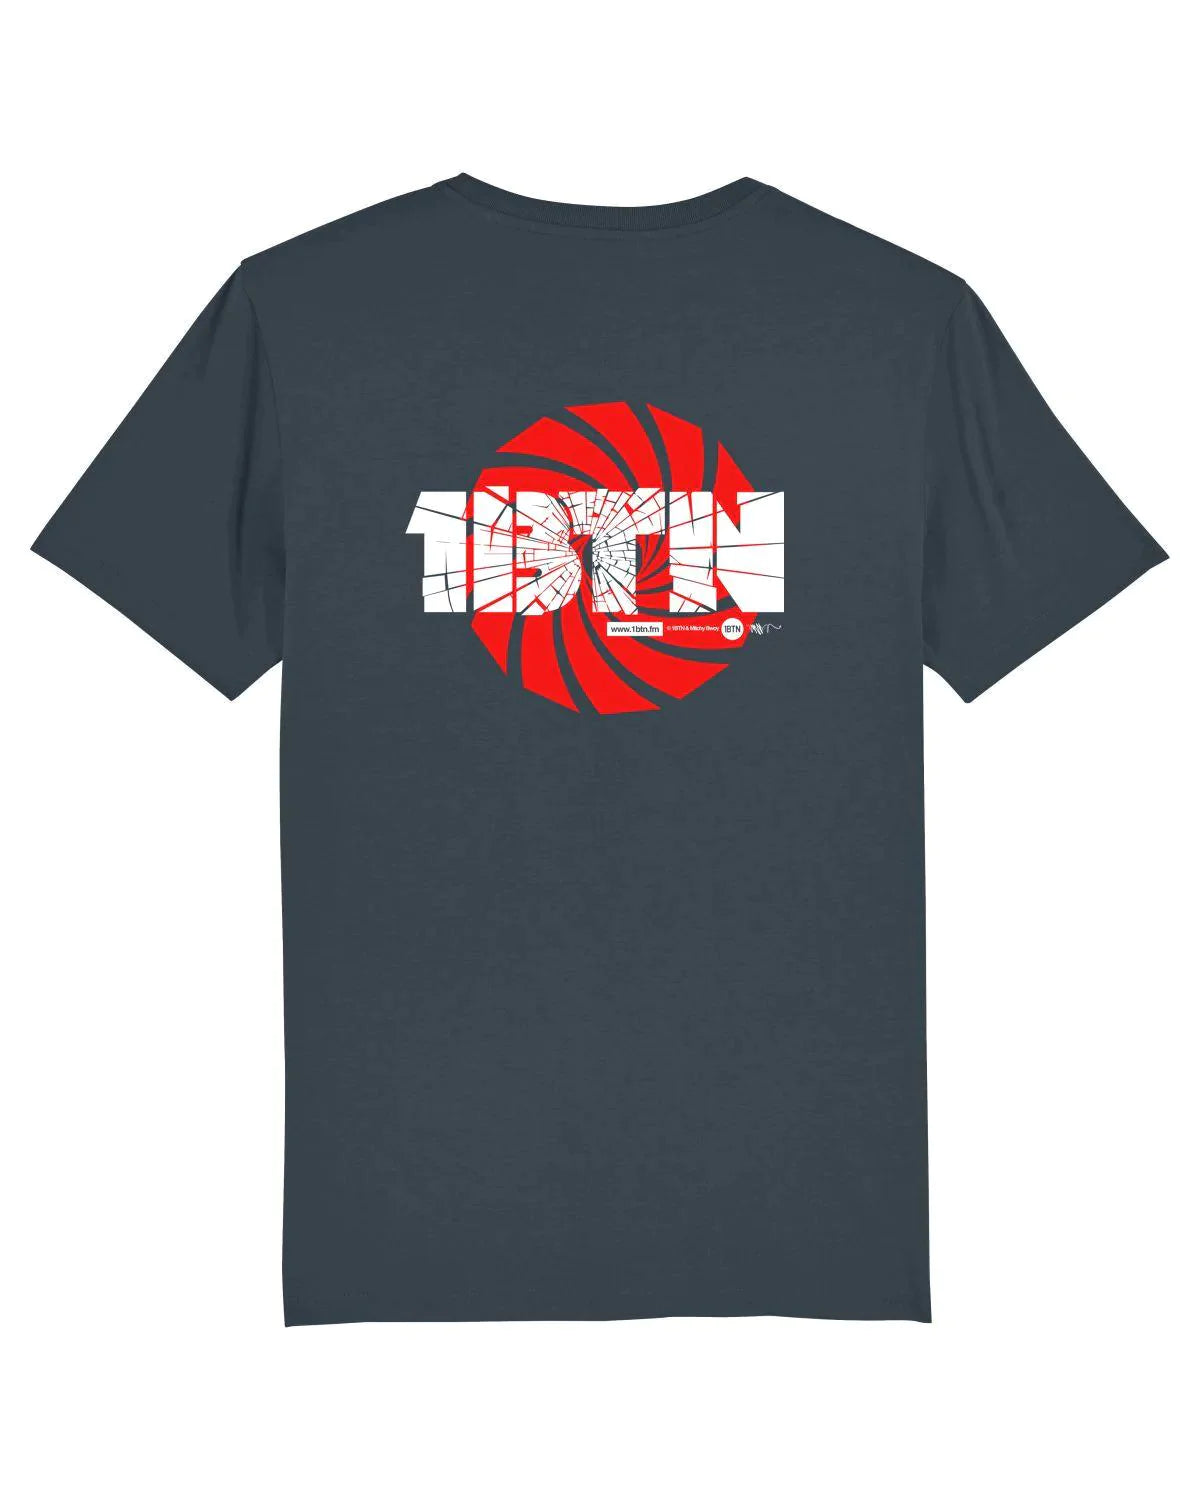 1BTN SWIRL By Mitchy Bwoy: 2 Sided T-Shirt Official Merchandise of 1BTN.FM (5 Colour Options) - SOUND IS COLOUR